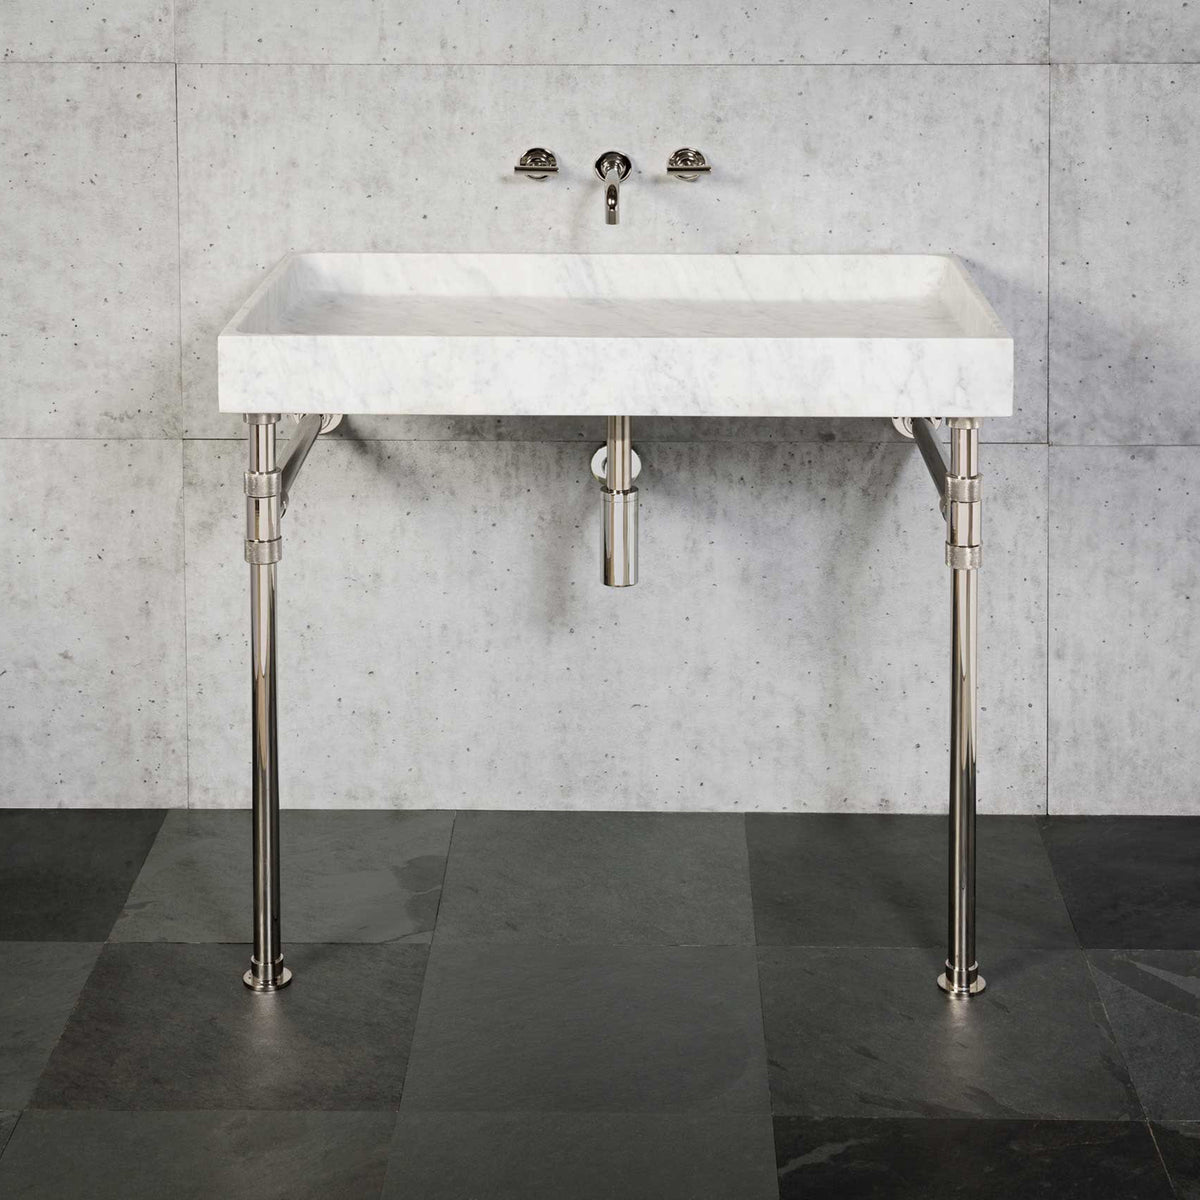 Ventus Bath Sink paired with Elemental Classic Vanity Legs image 2 of 4